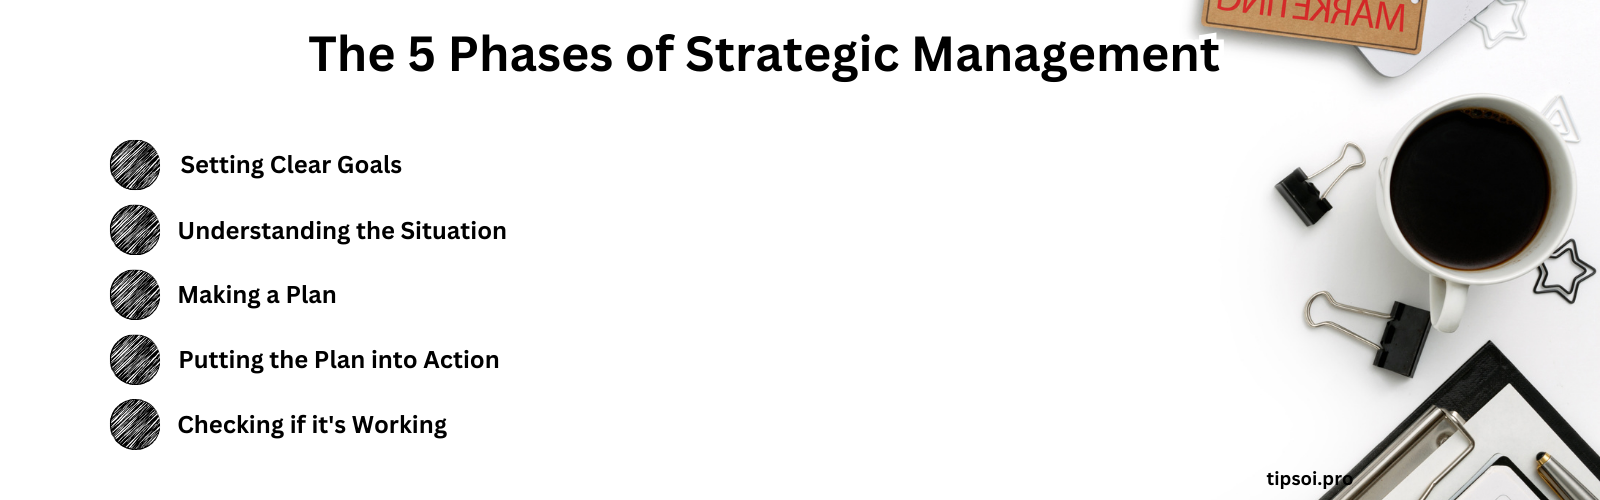 The 5 Phases of Strategic Management